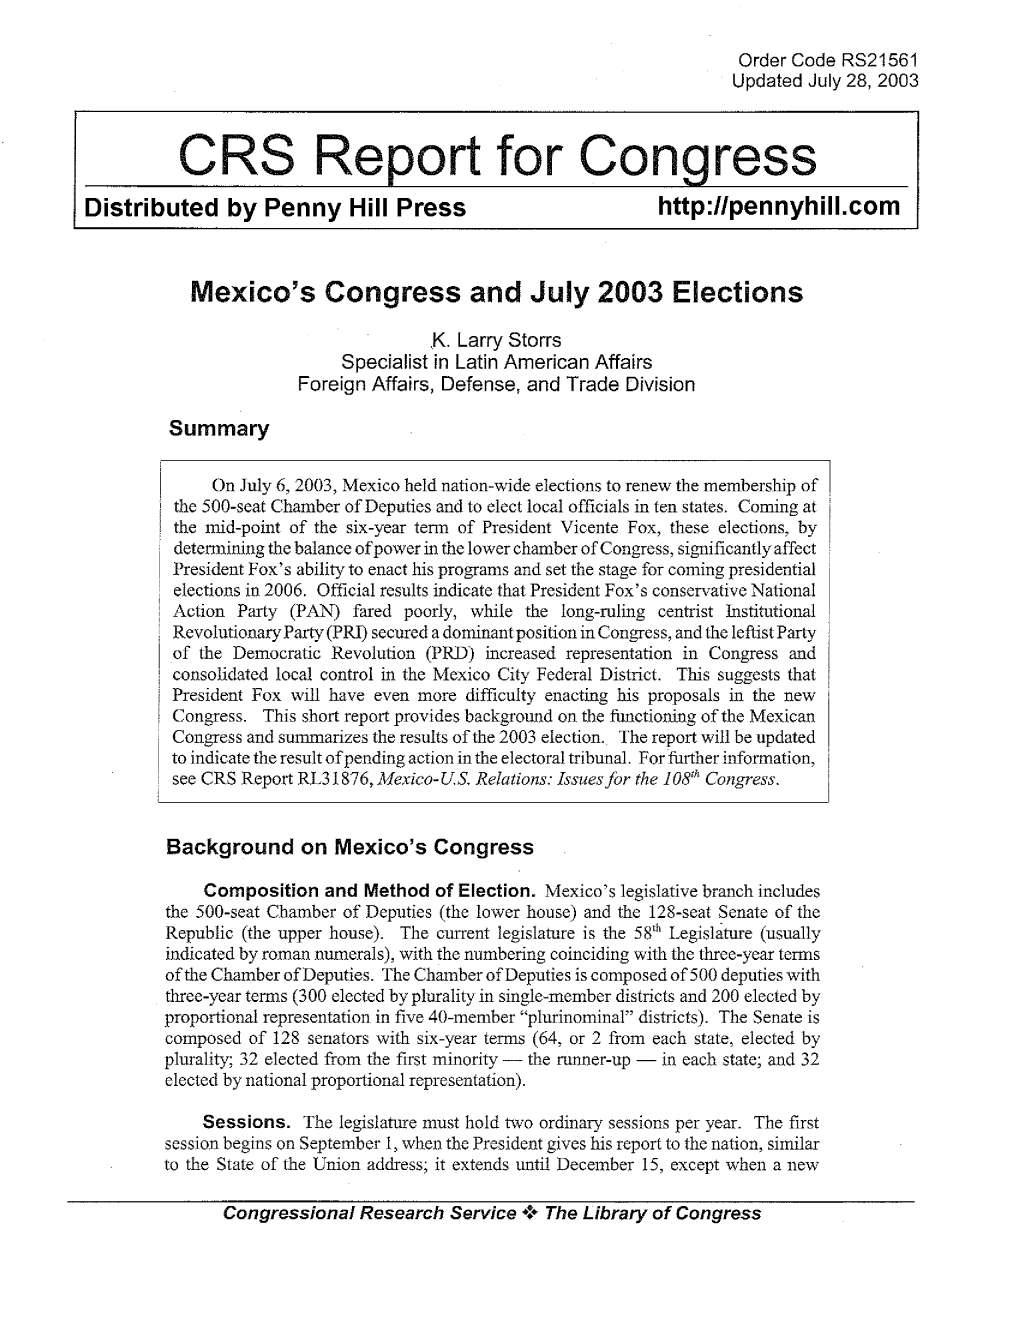 CRS Report for Congress Distributed by Penny Hill Press Http :Llpennyhill .Co M